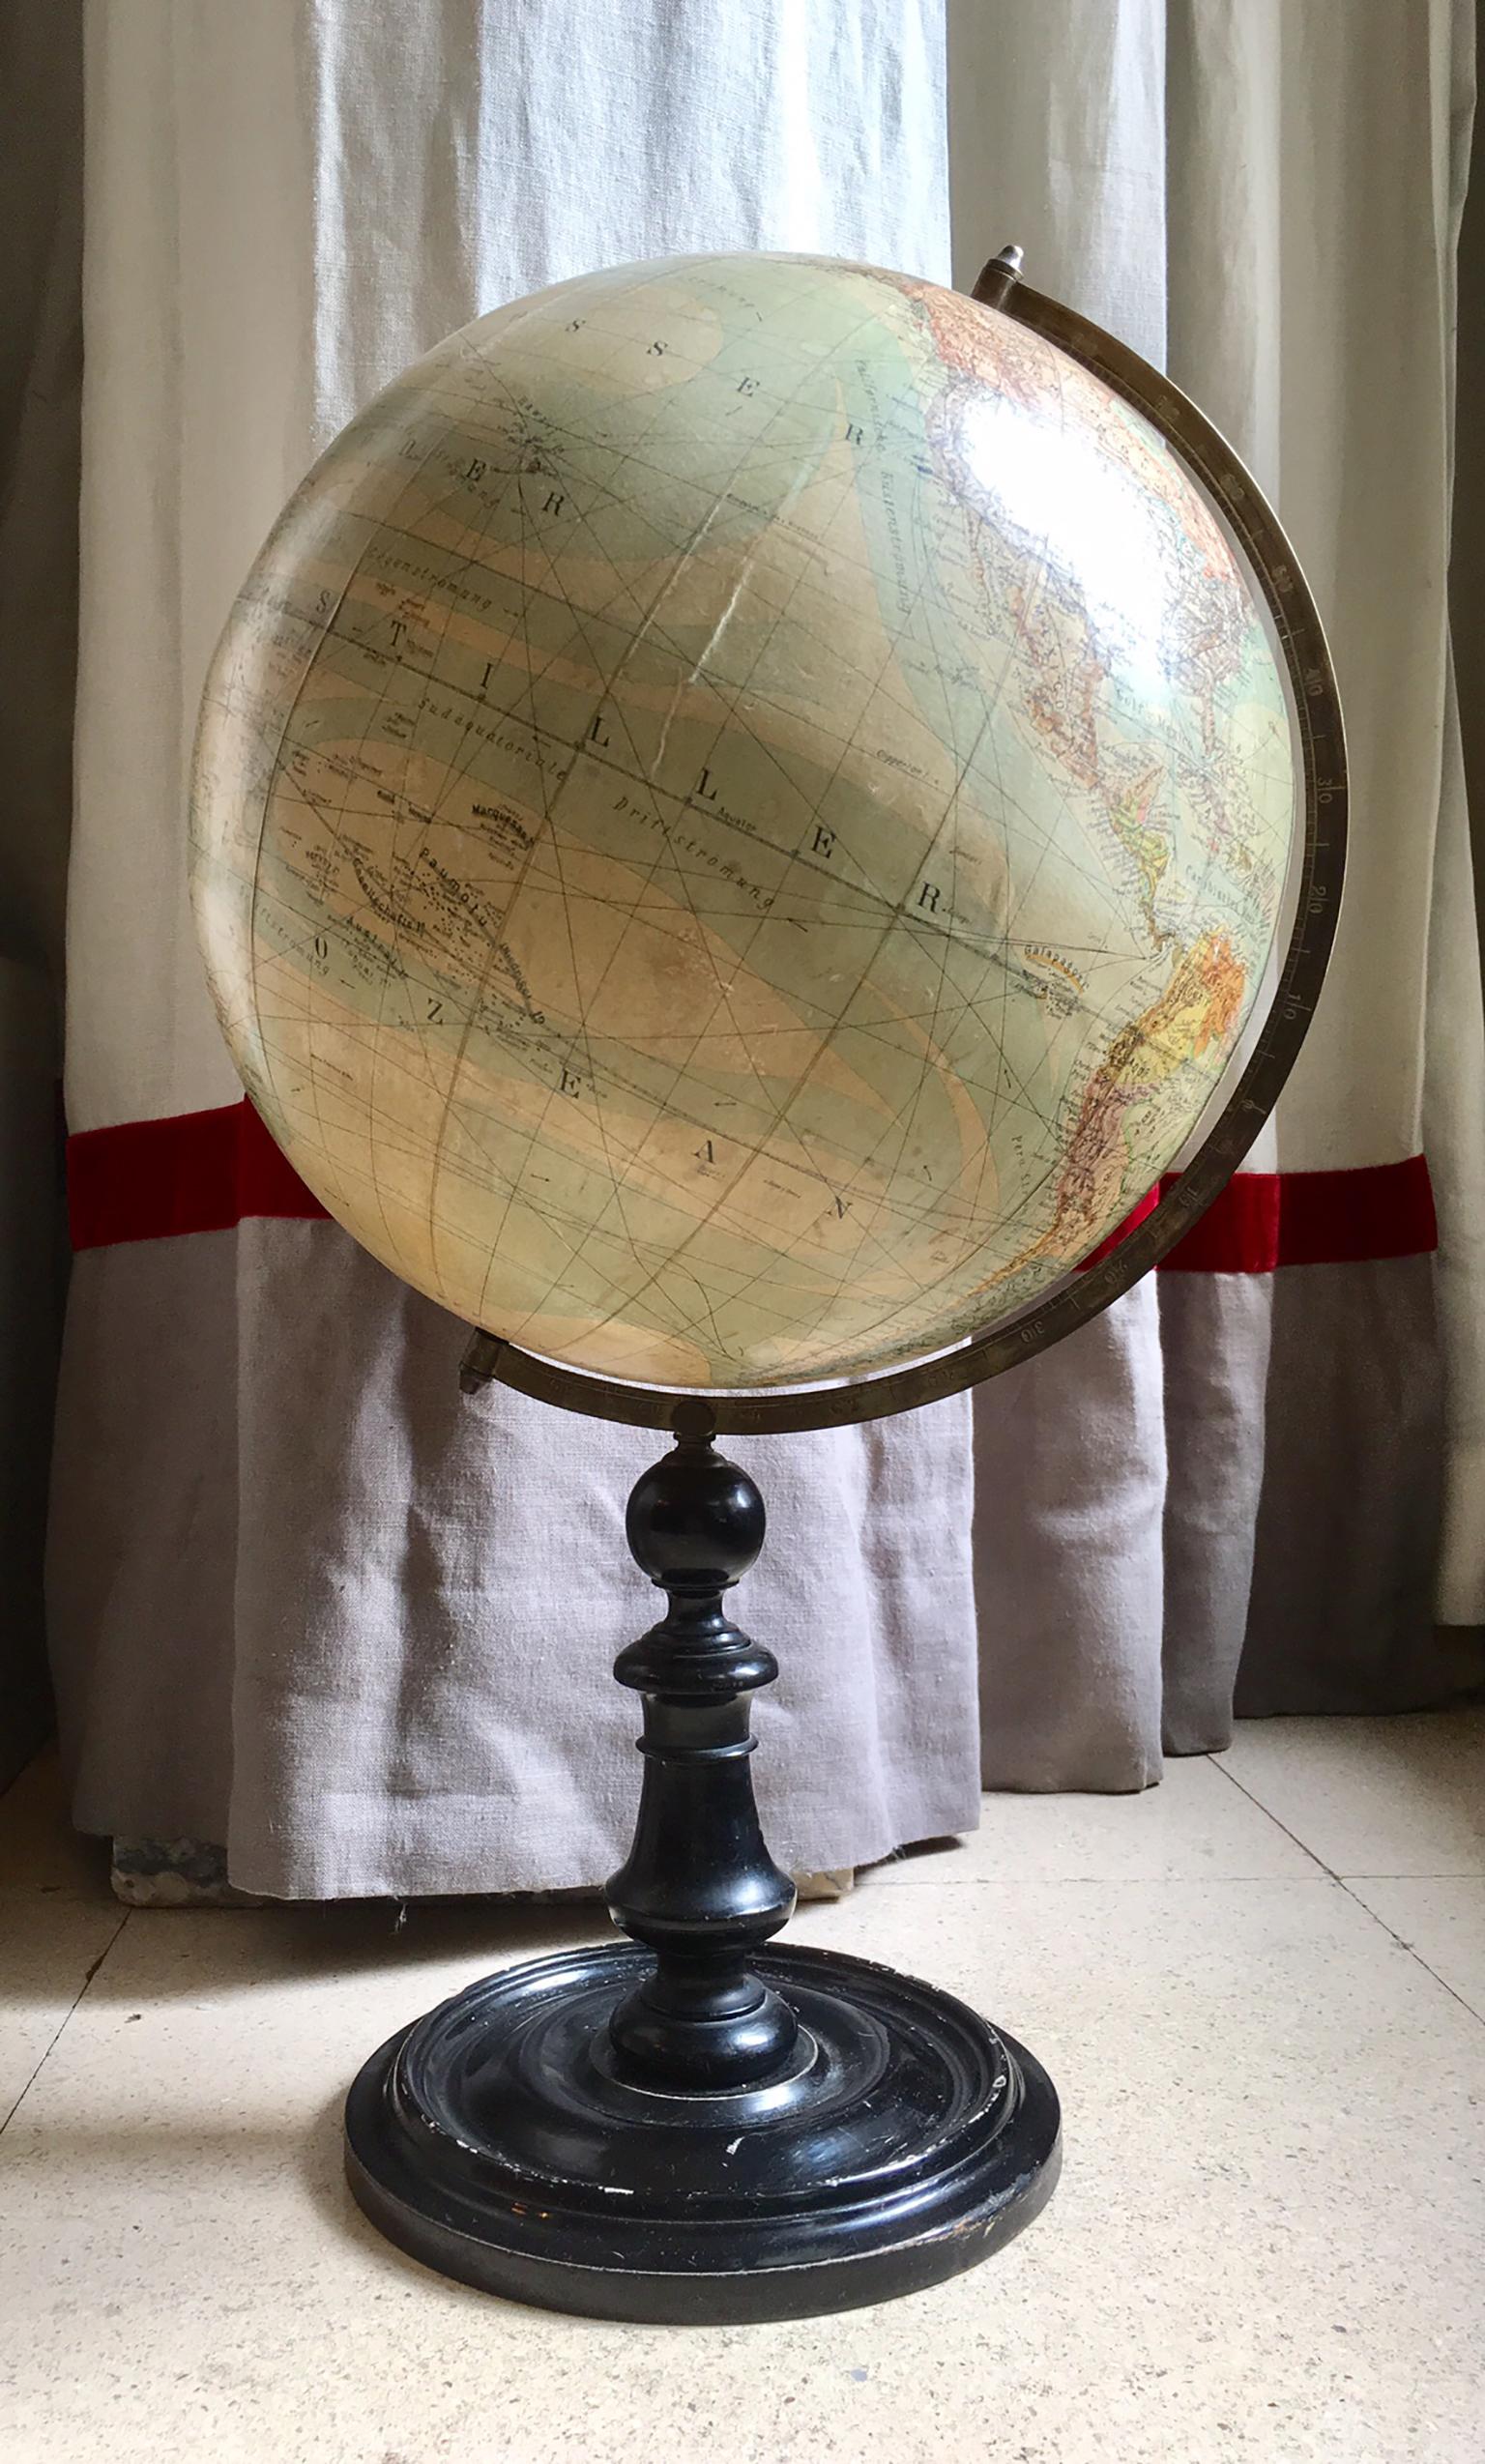 Early 20th century antique traditional Columbus earth globe, brass frame, papier mâché sphere and turned, ebonized wooden base.
Gezeichnet & Hergestellt
Peter J. Oestergaard.